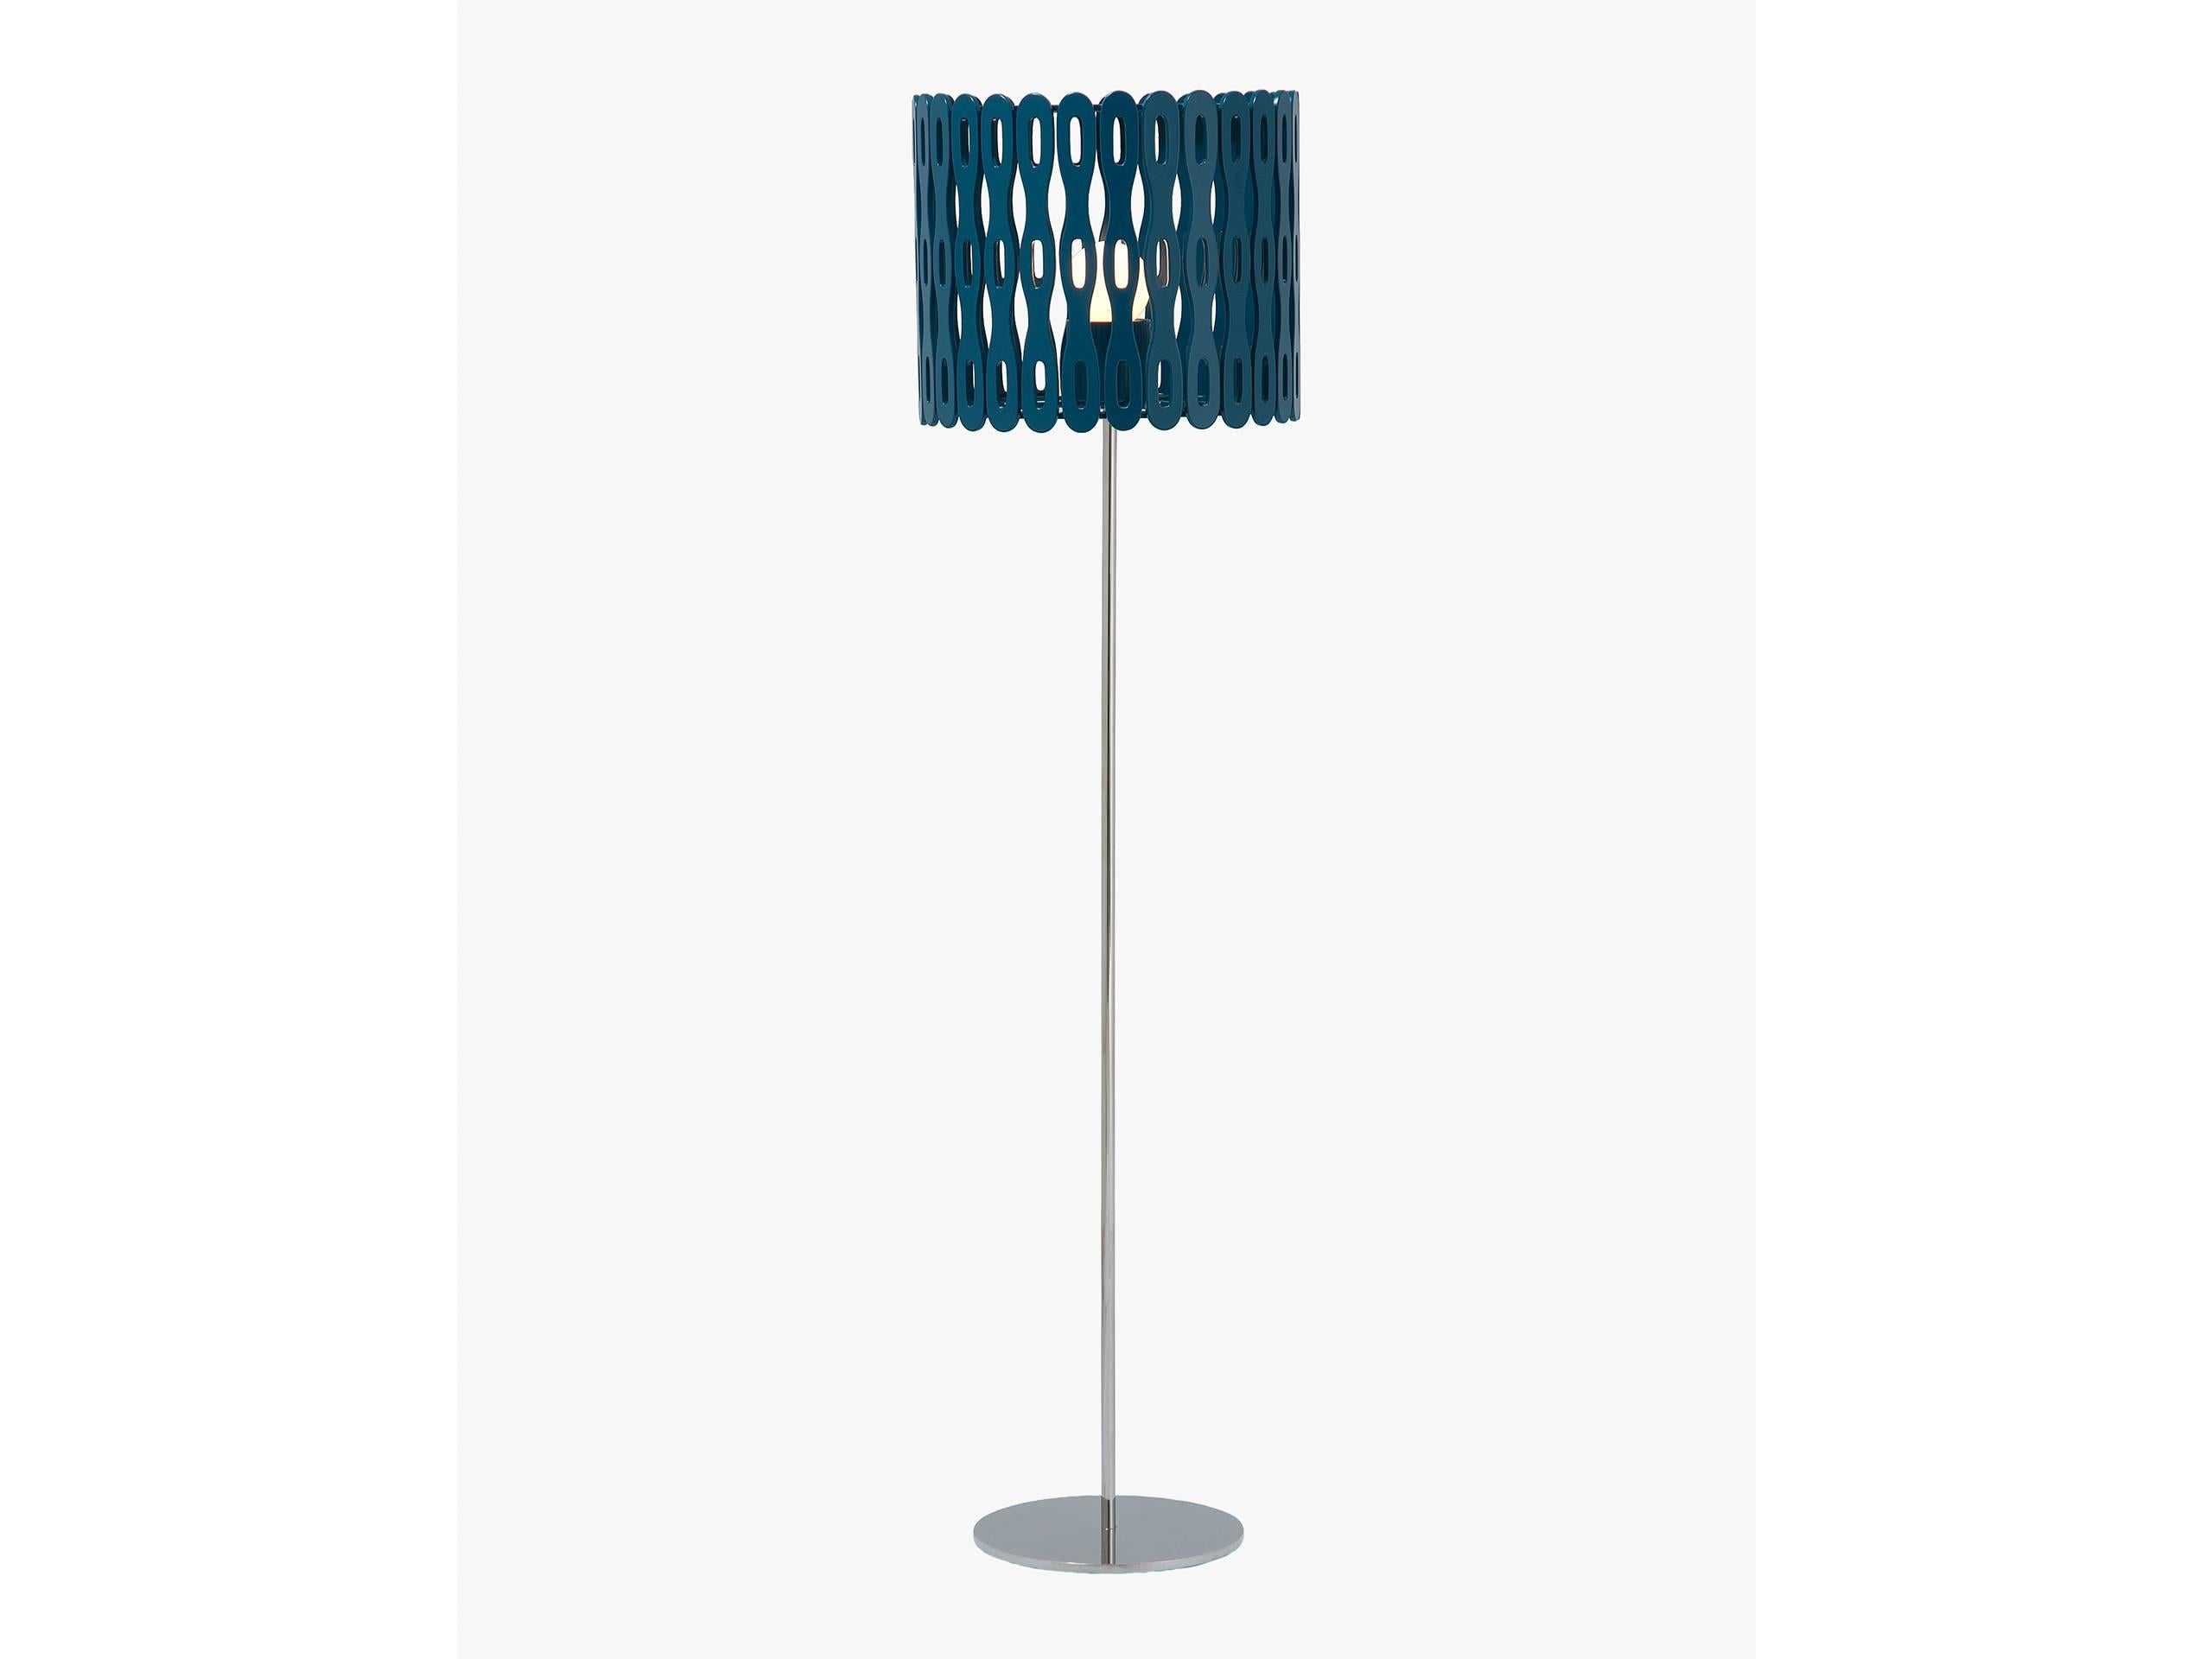 This lamp was designed for study and floor. The shade of this lamp is composed of wooden pieces whose design was inspired by the patterns on the seafront sidewalks of Arpoador and Ipanema. Places which the designers at Lattoog and Cariocas alike